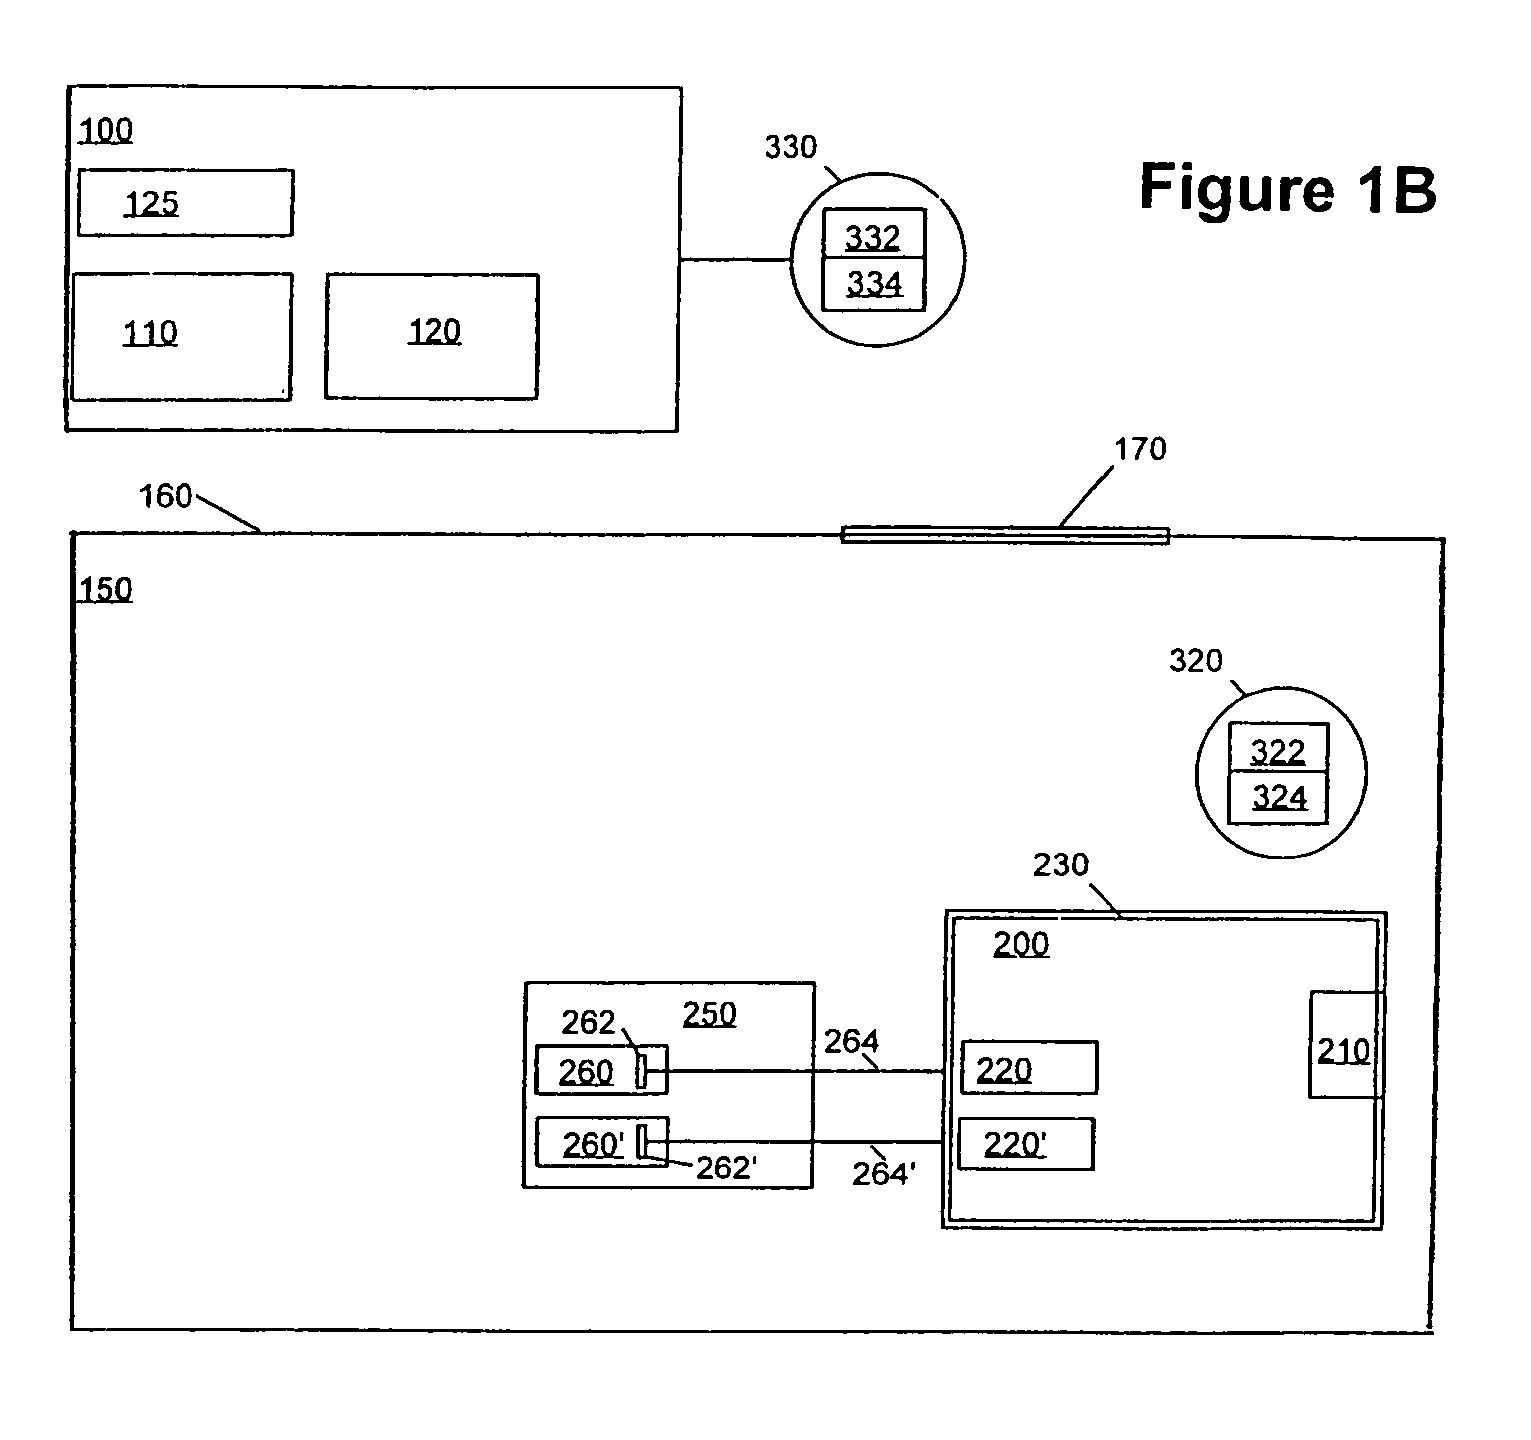 Communication systems for use with magnetic resonance imaging systems